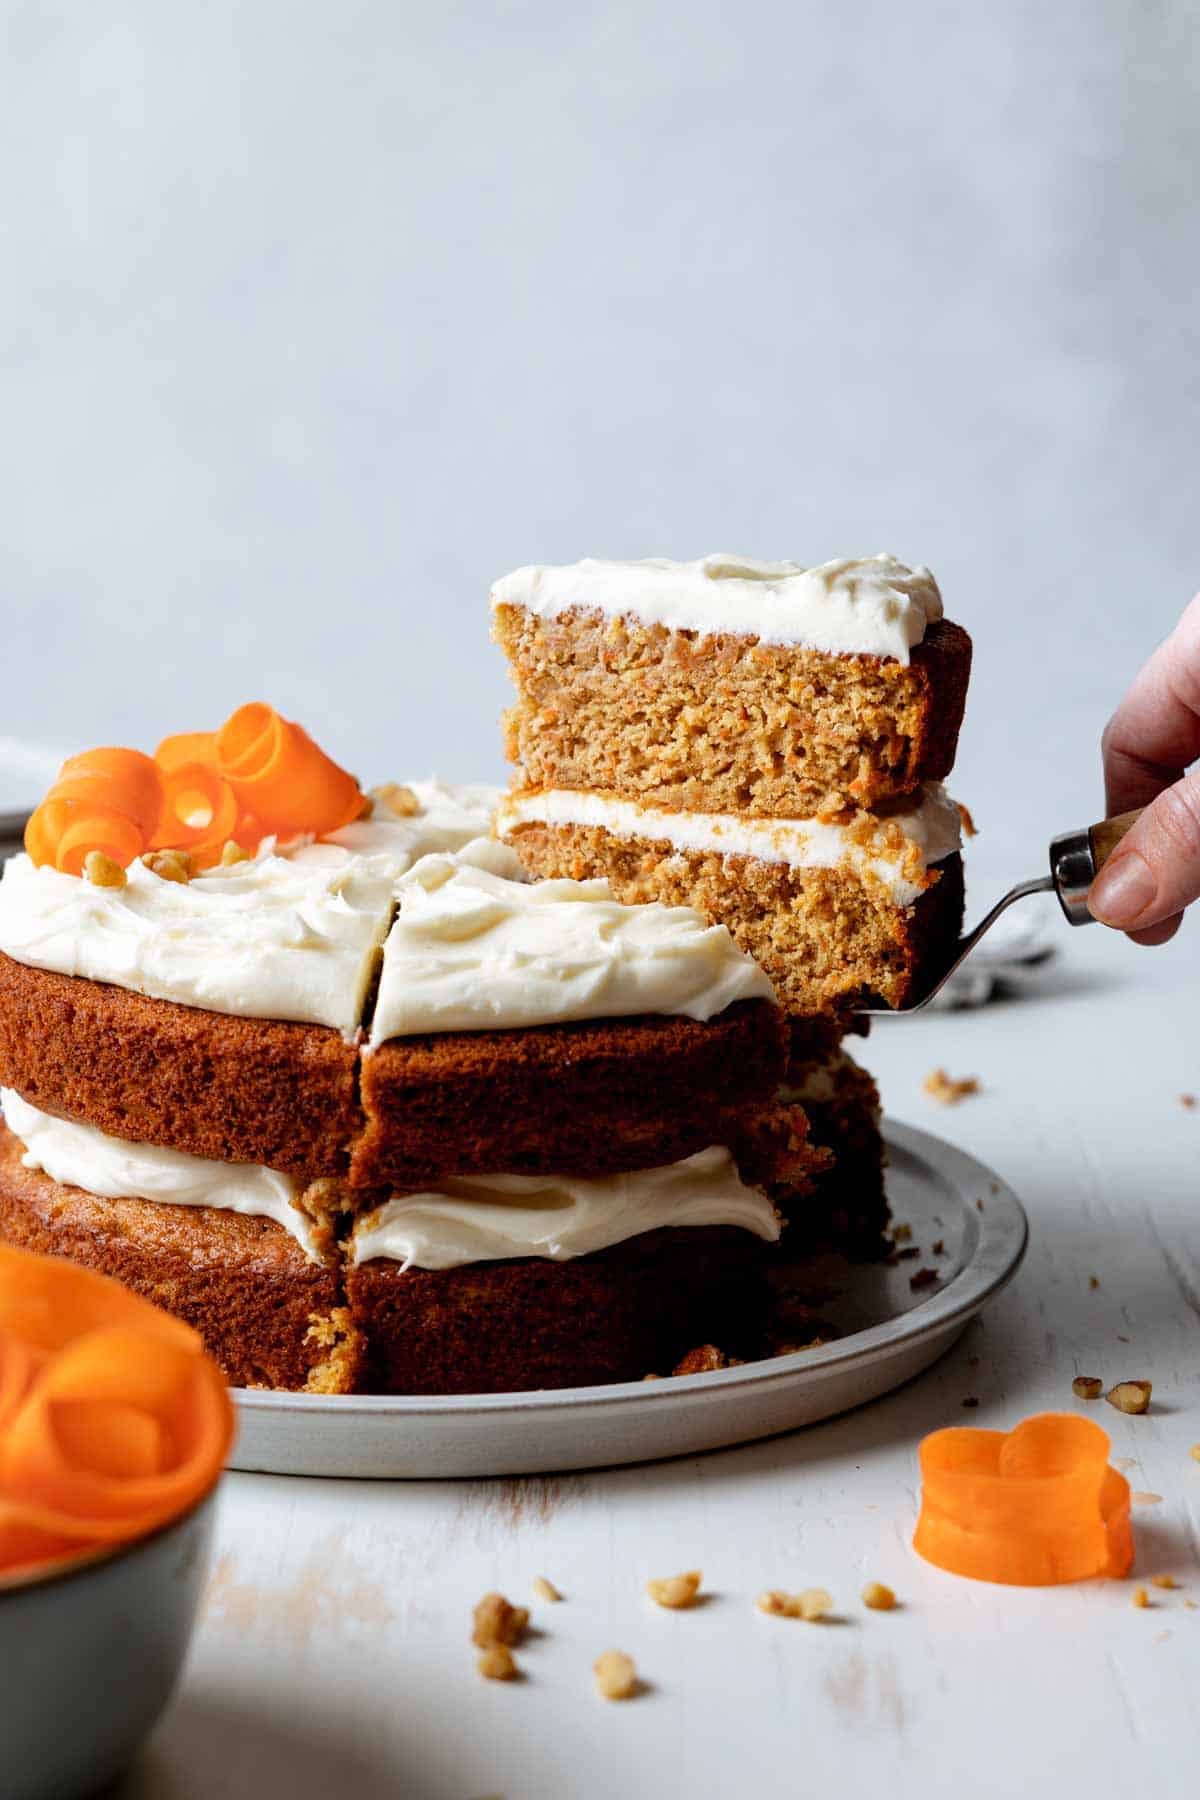 Slice of carrot cake is lifted from the rest of the cake on a spatula. 